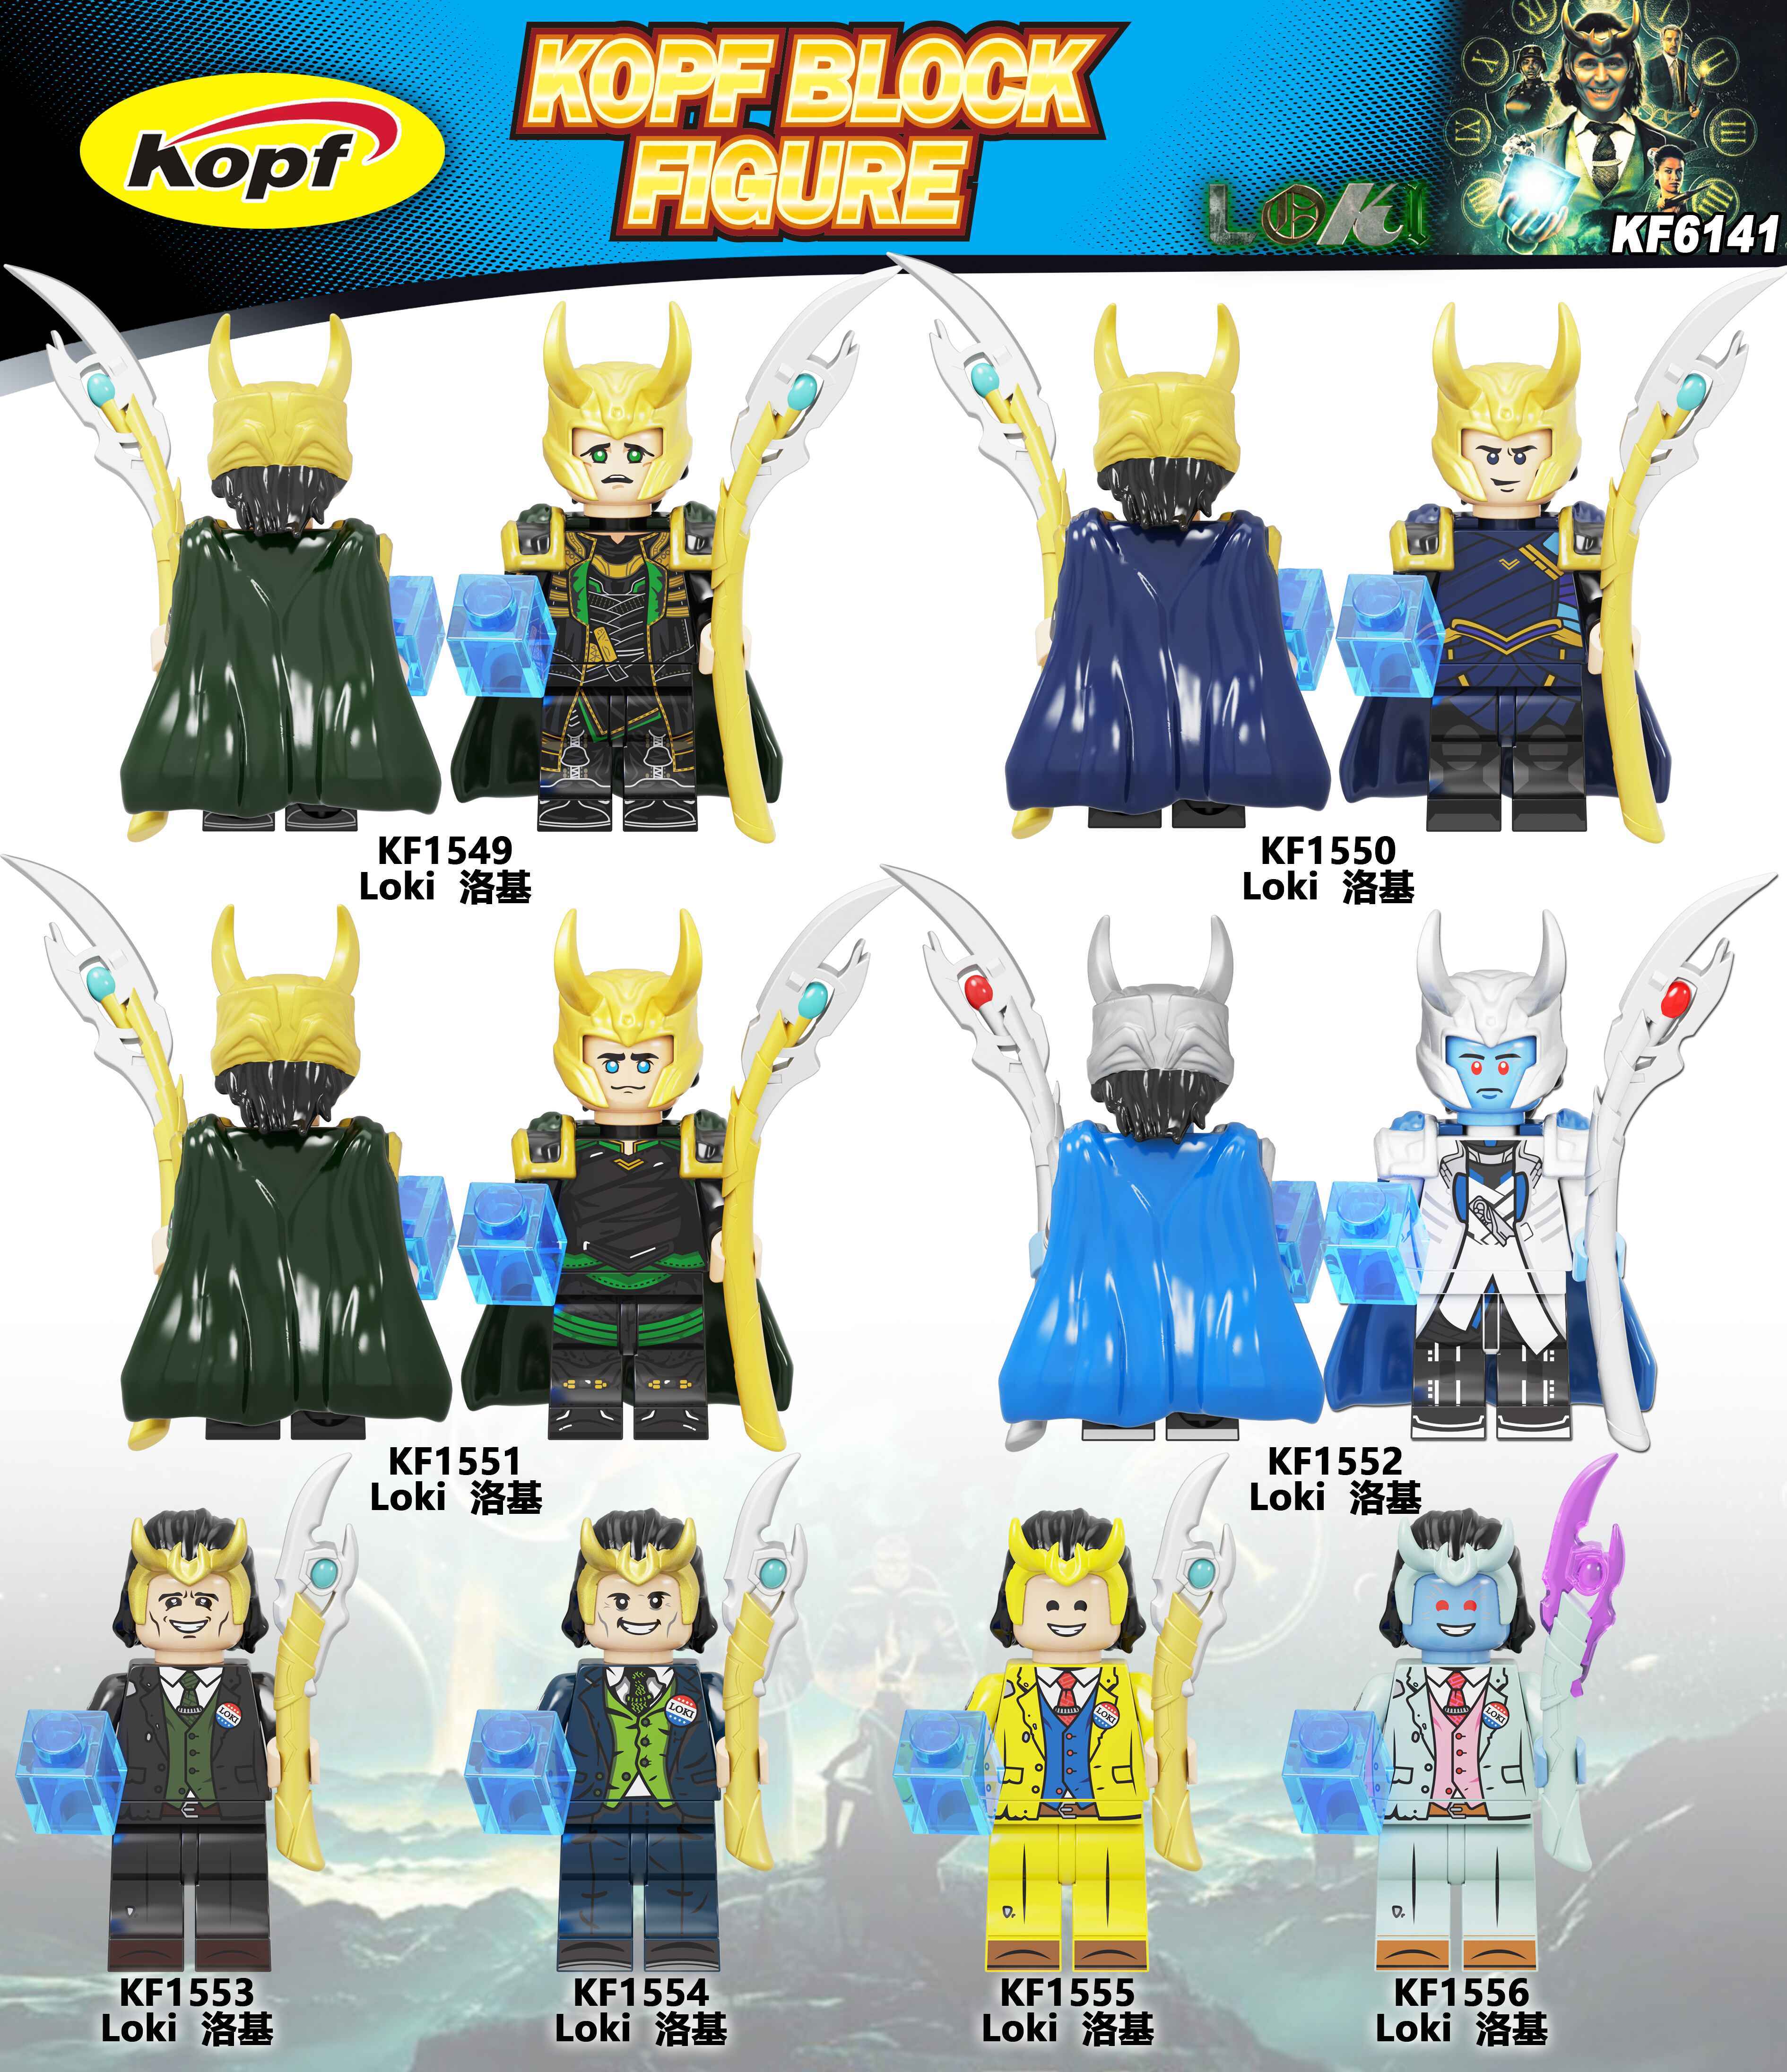 KF1549 KF1550 KF1551 KF1552 KF1553 KF1554 KF1555 KF1556 KF6141 Loki New Famous Movie Series Characters Bricks Building Blocks Action Figures Educational Toys For Children's Gifts